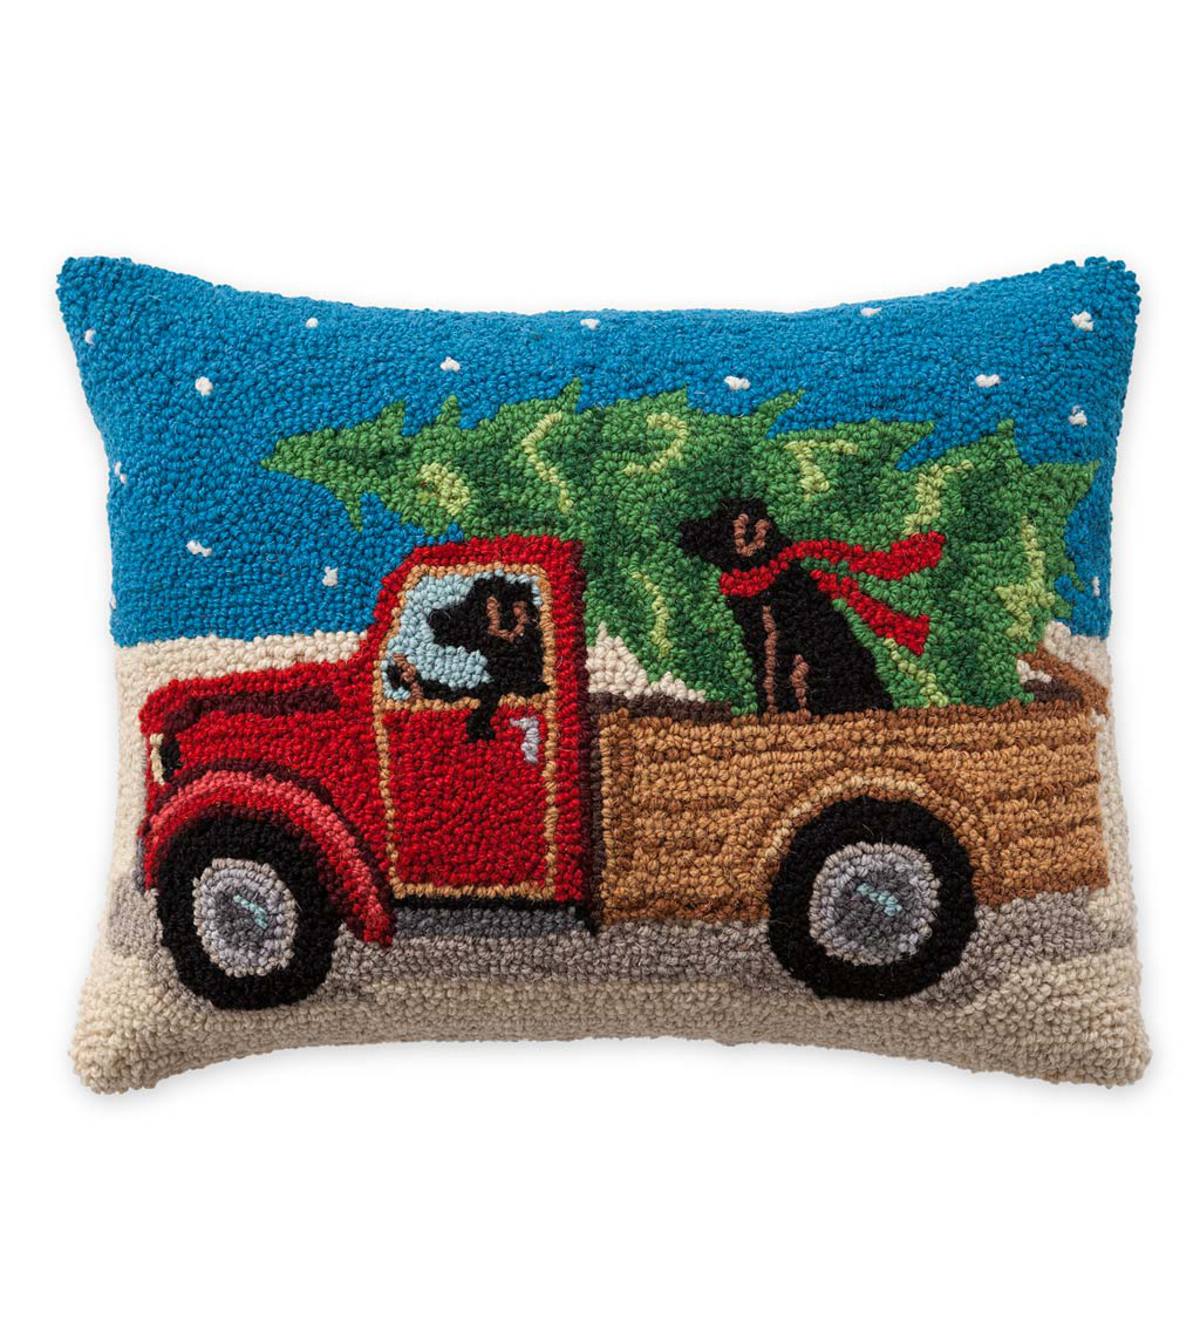 Hooked Wool Holiday Throw Pillow with Black Labs in Truck